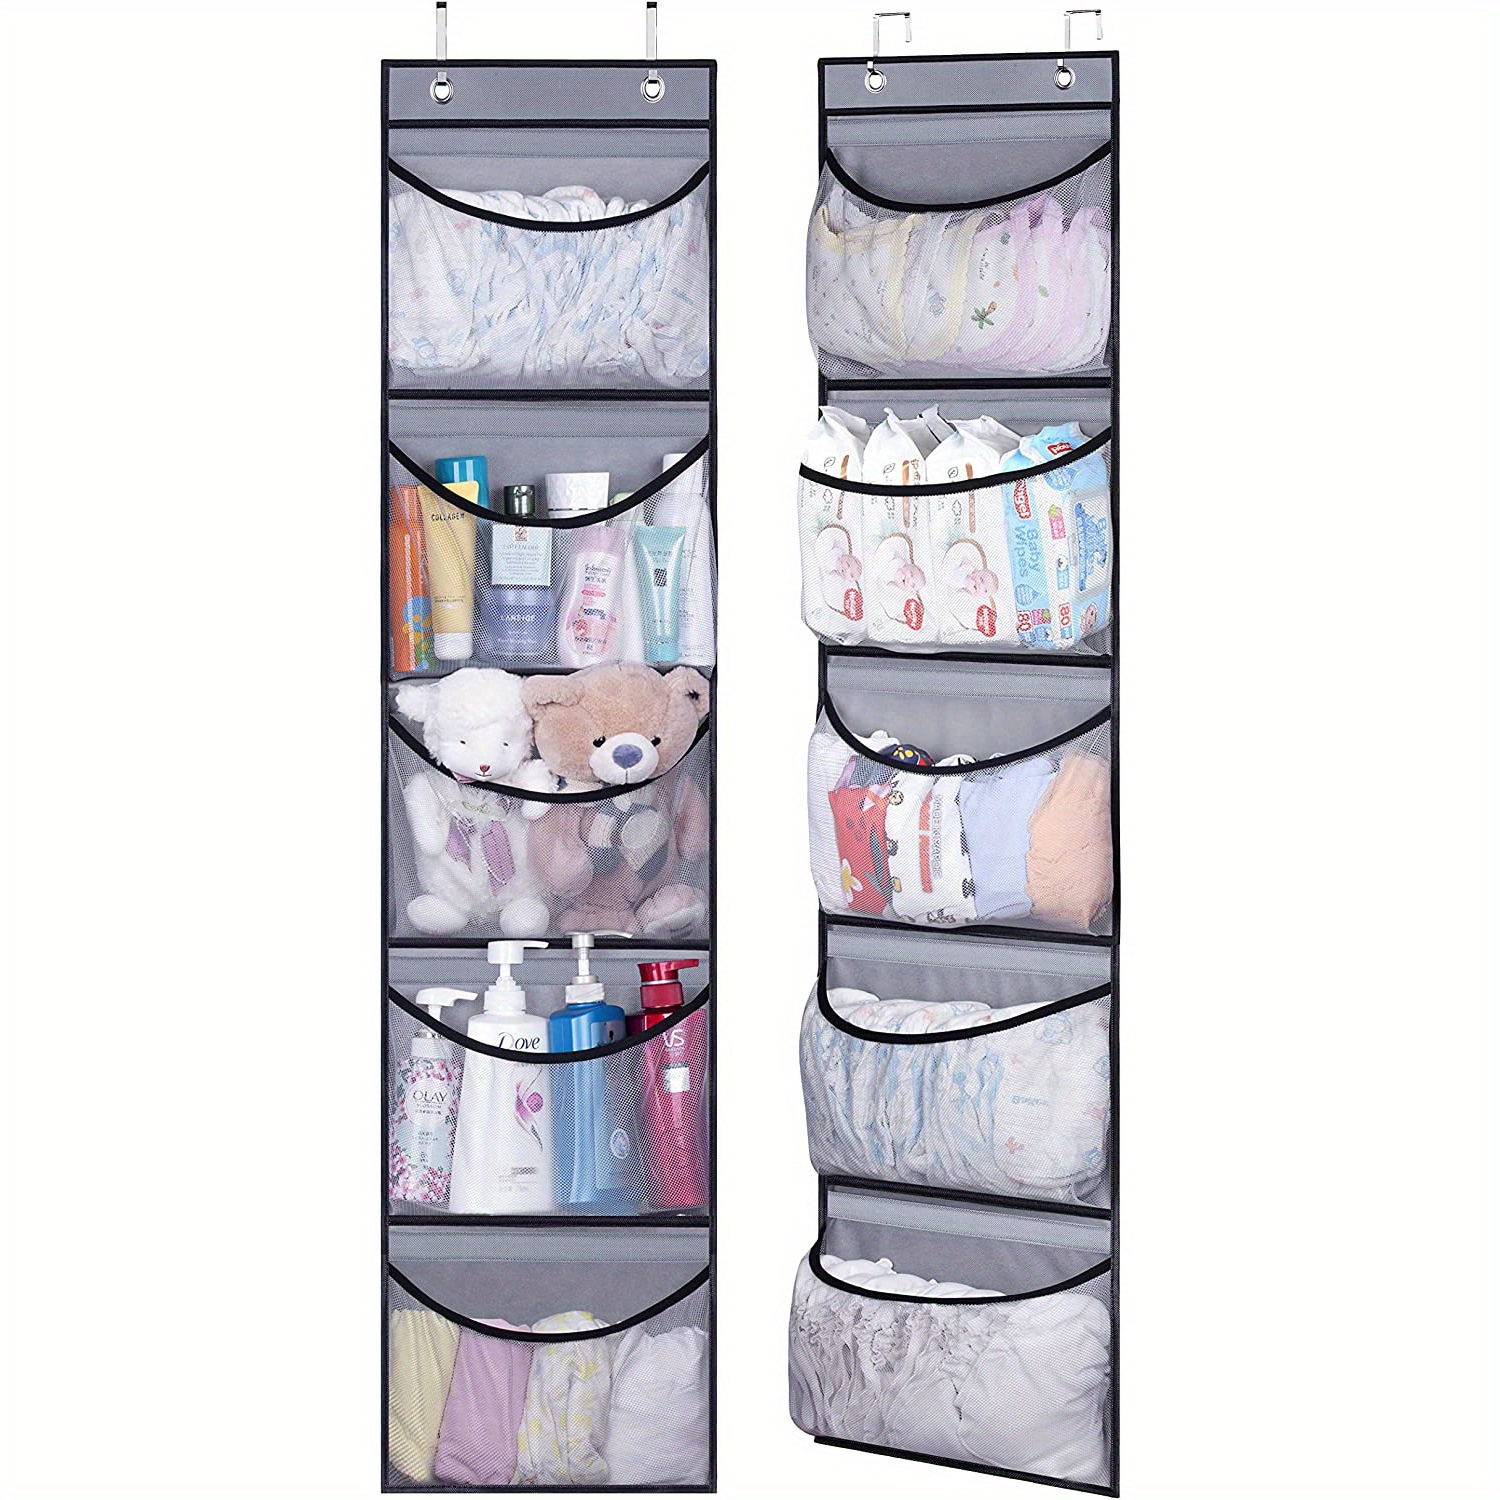 

5-layer Over-the-door Organizer - Large Hanging Storage Bag For Toys, Clothes & Sundries - Durable Non-woven Fabric With Lining Board